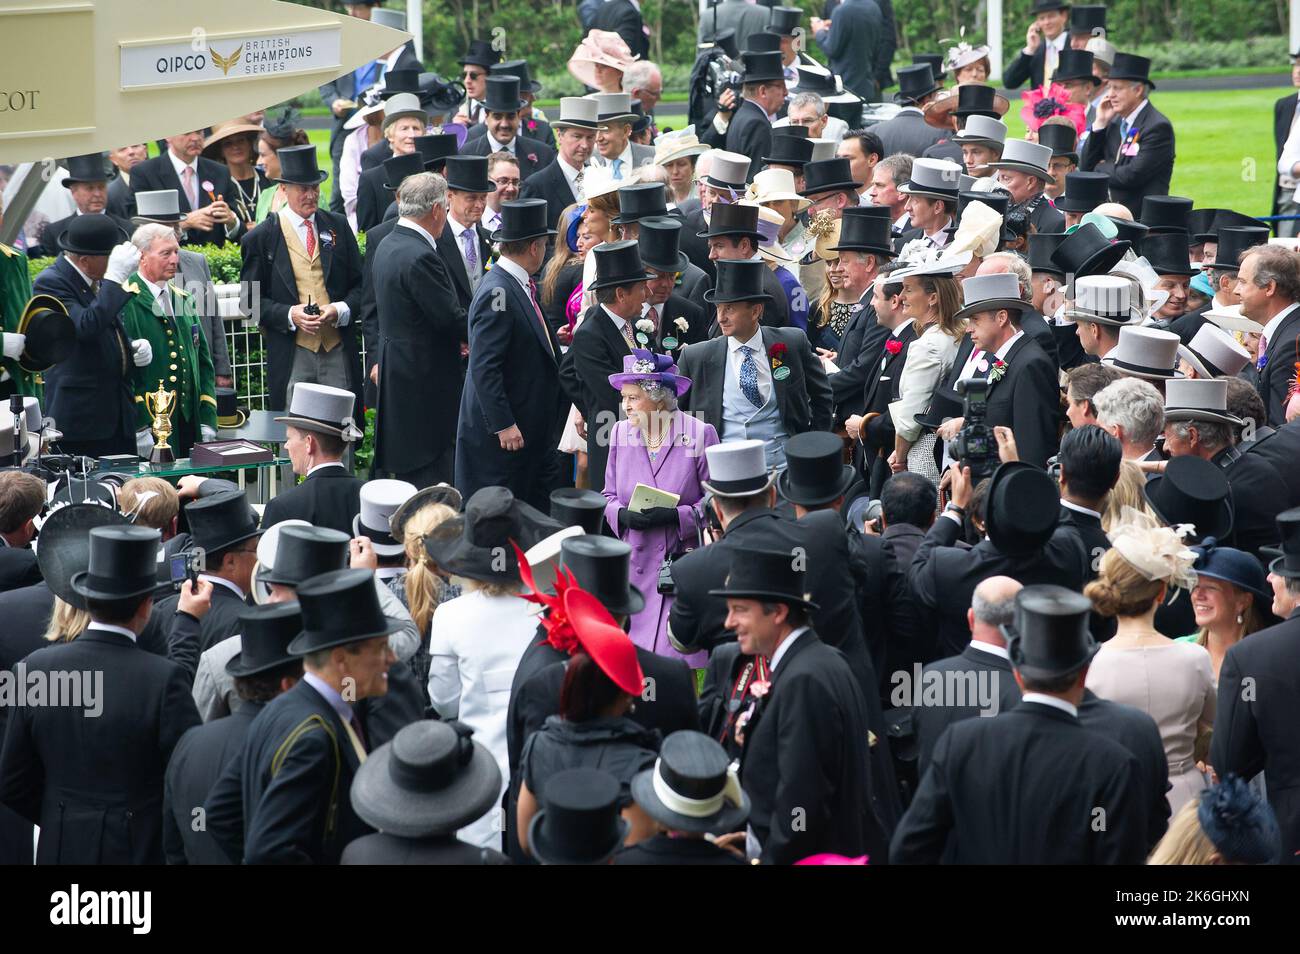 Ascot, Berkshire, UK. 20th June, 2013. Her Majesty the Queen was clearly delighted as her horse Estimate won the Ascot Gold Cup today on Ladies Day at Royal Ascot. This was an historic day as it was the first time a reigning monarch had won the Gold Cup. Estimate was ridden by jockey Ryan Moore. Queen Elizabeth II was due to the presentation for the Gold Cup but her son, the Duke of York did the presentation instead. Issue Date: 14th October 2022. Credit: Maureen McLean/Alamy Stock Photo